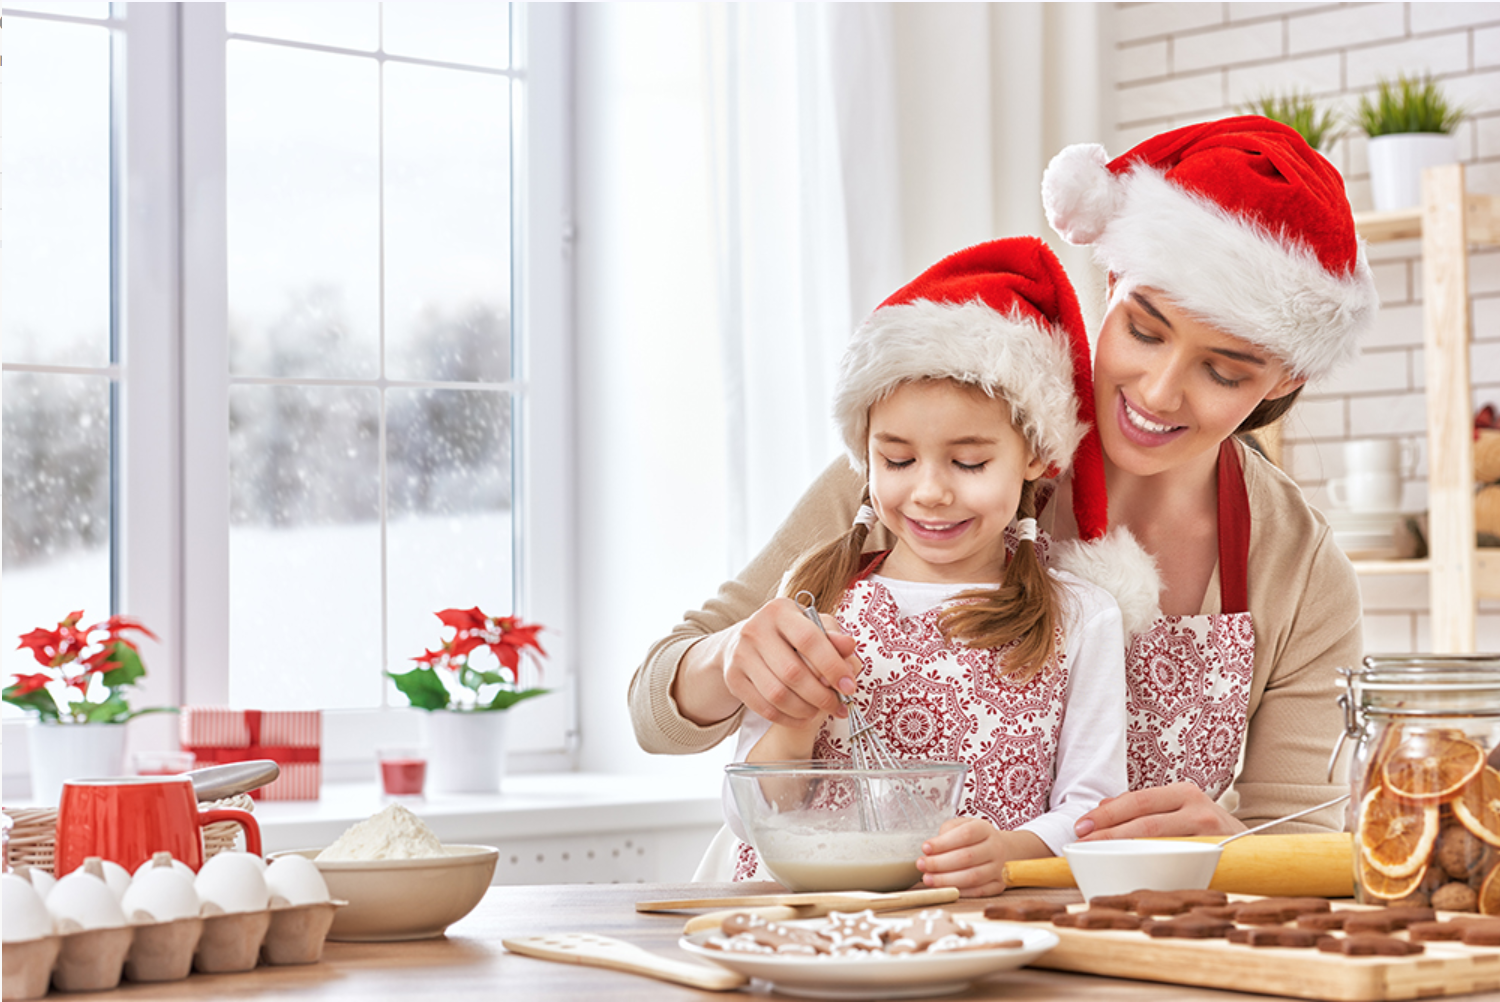 holiday cooking for allergy-prone kids